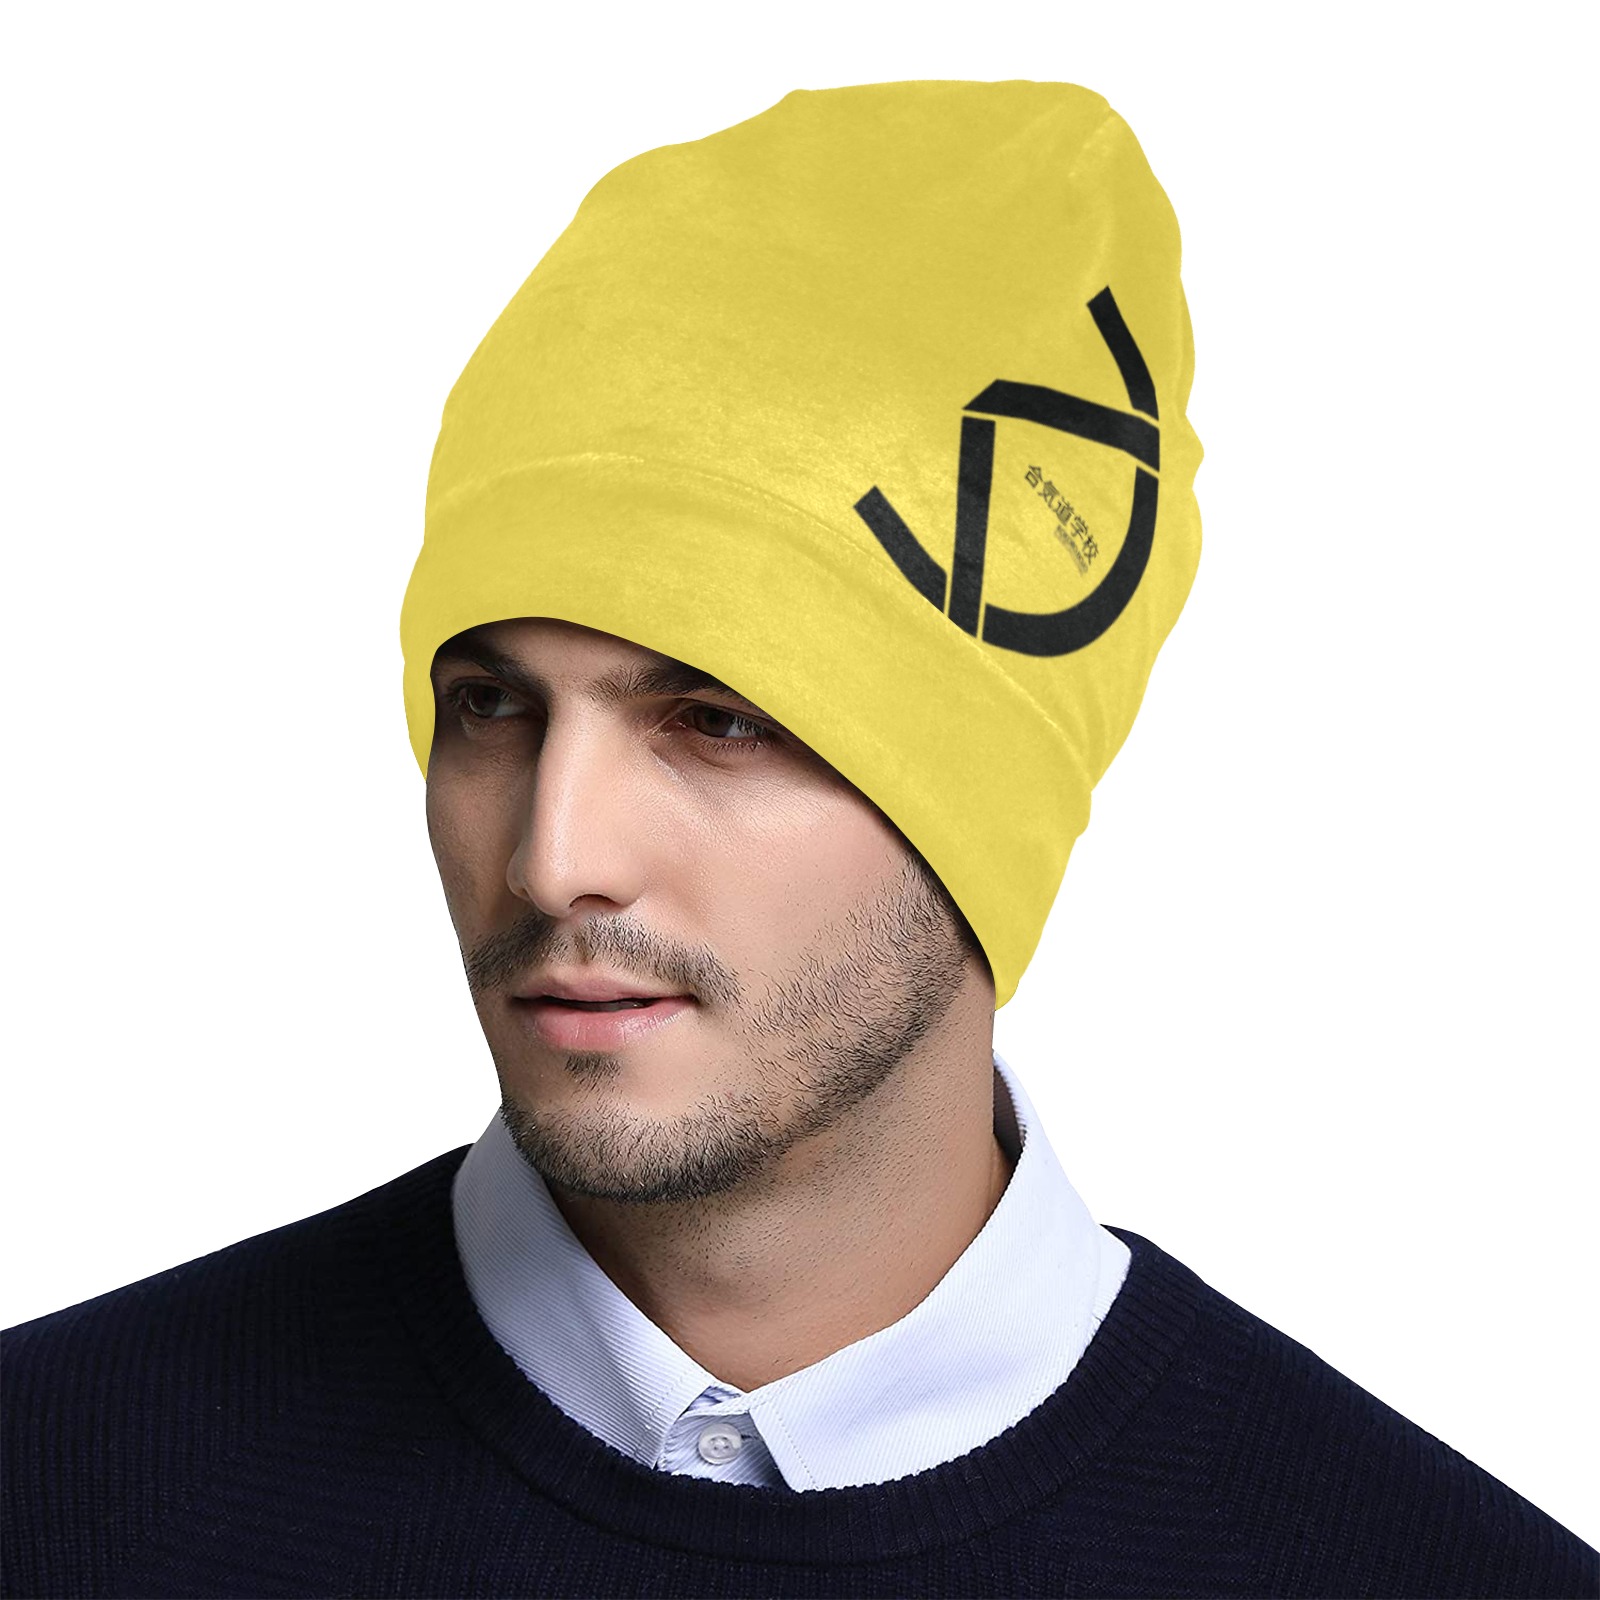 KD YELLOW All Over Print Beanie for Adults